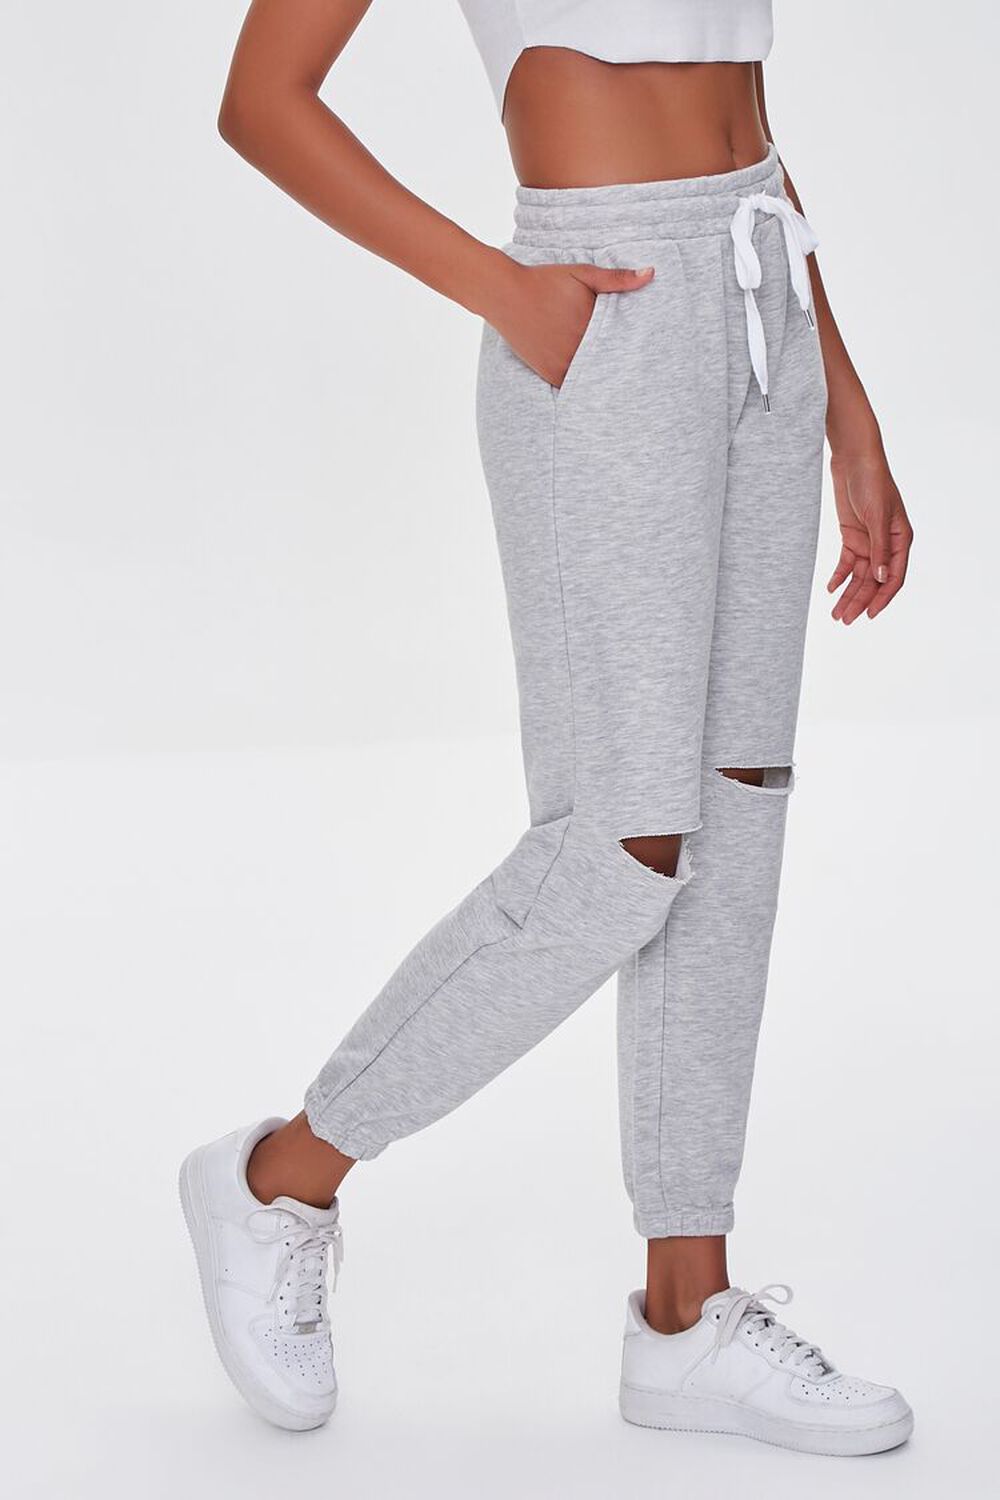 HEATHER GREY Distressed French Terry Joggers, image 3